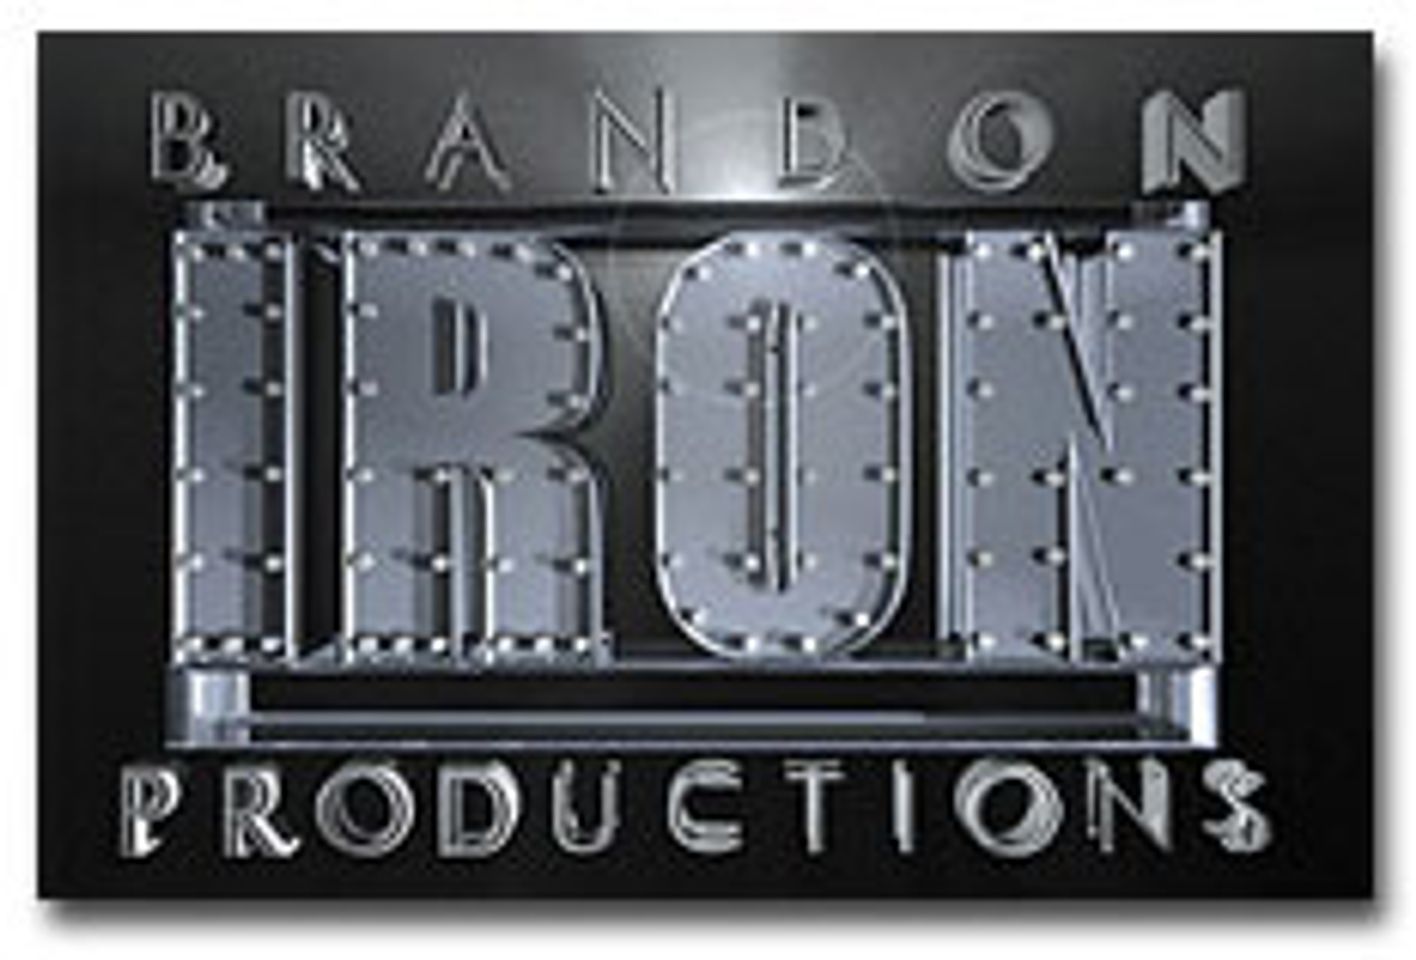 Brandon Iron Offers Free DVD to Madoff Scam Victims